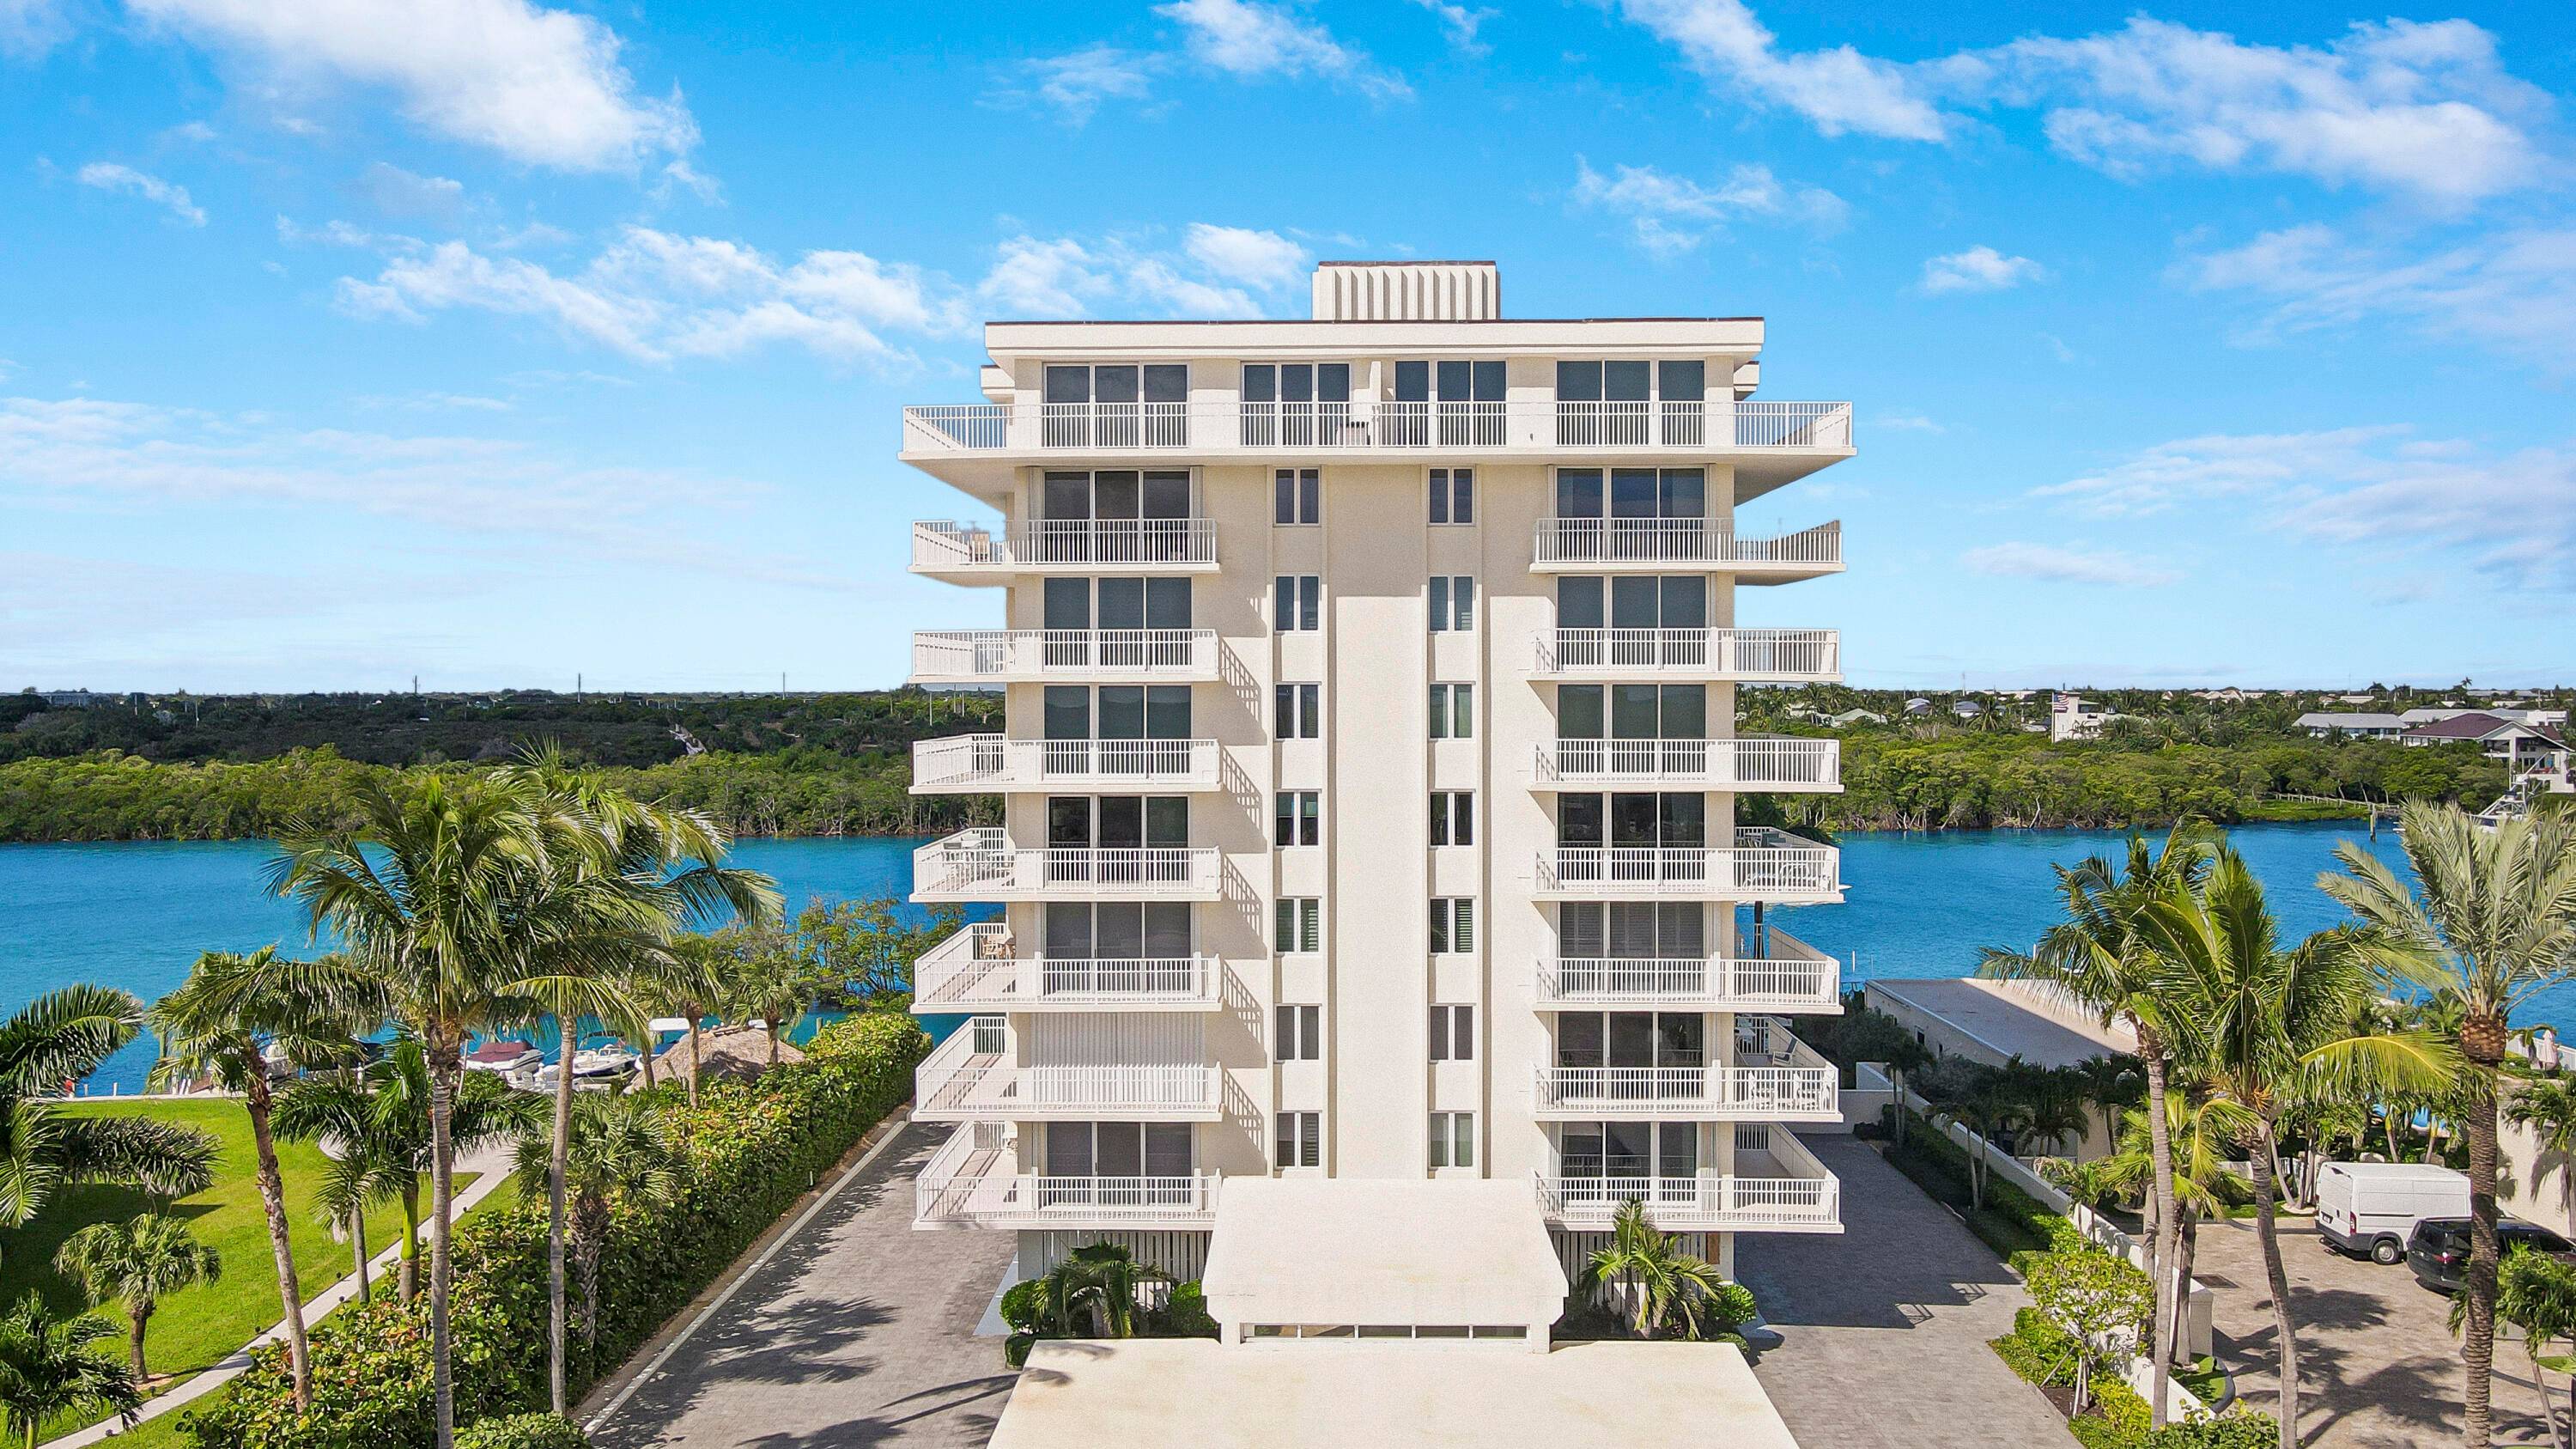 LaMar is a stunning condo located in an oceanside community, offering breathtaking views of the intracoastal and the iconic Jupiter lighthouse.